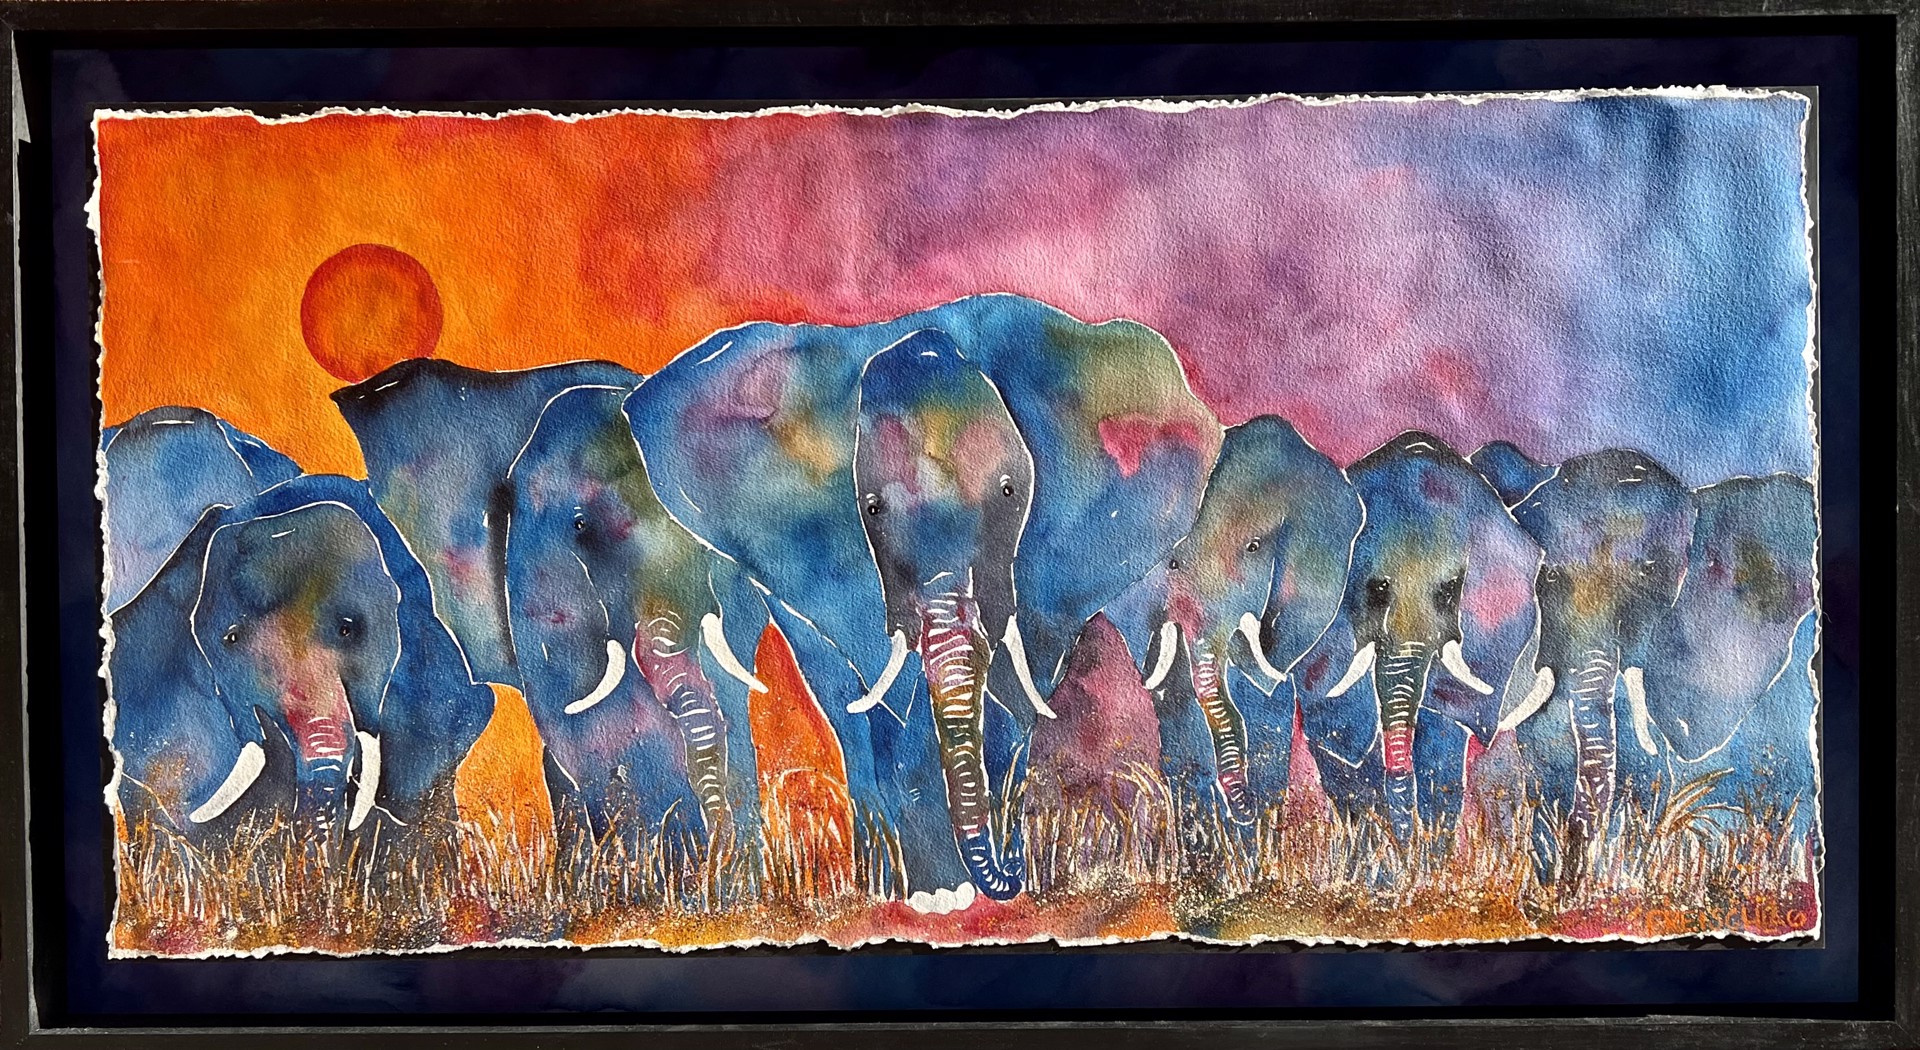 The Color of Elephants by Peter Freischlag